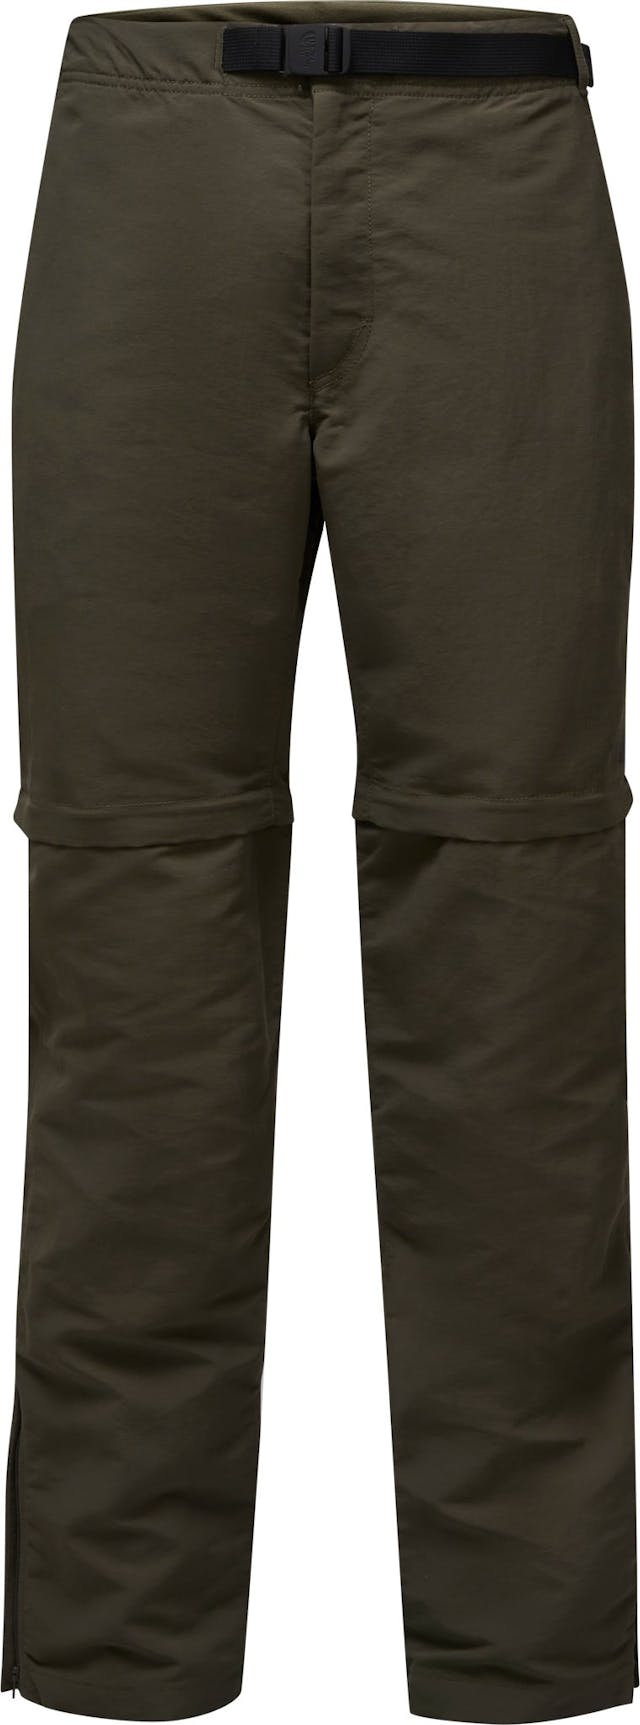 Product image for Paramount Trail Convertible Pants - Men's